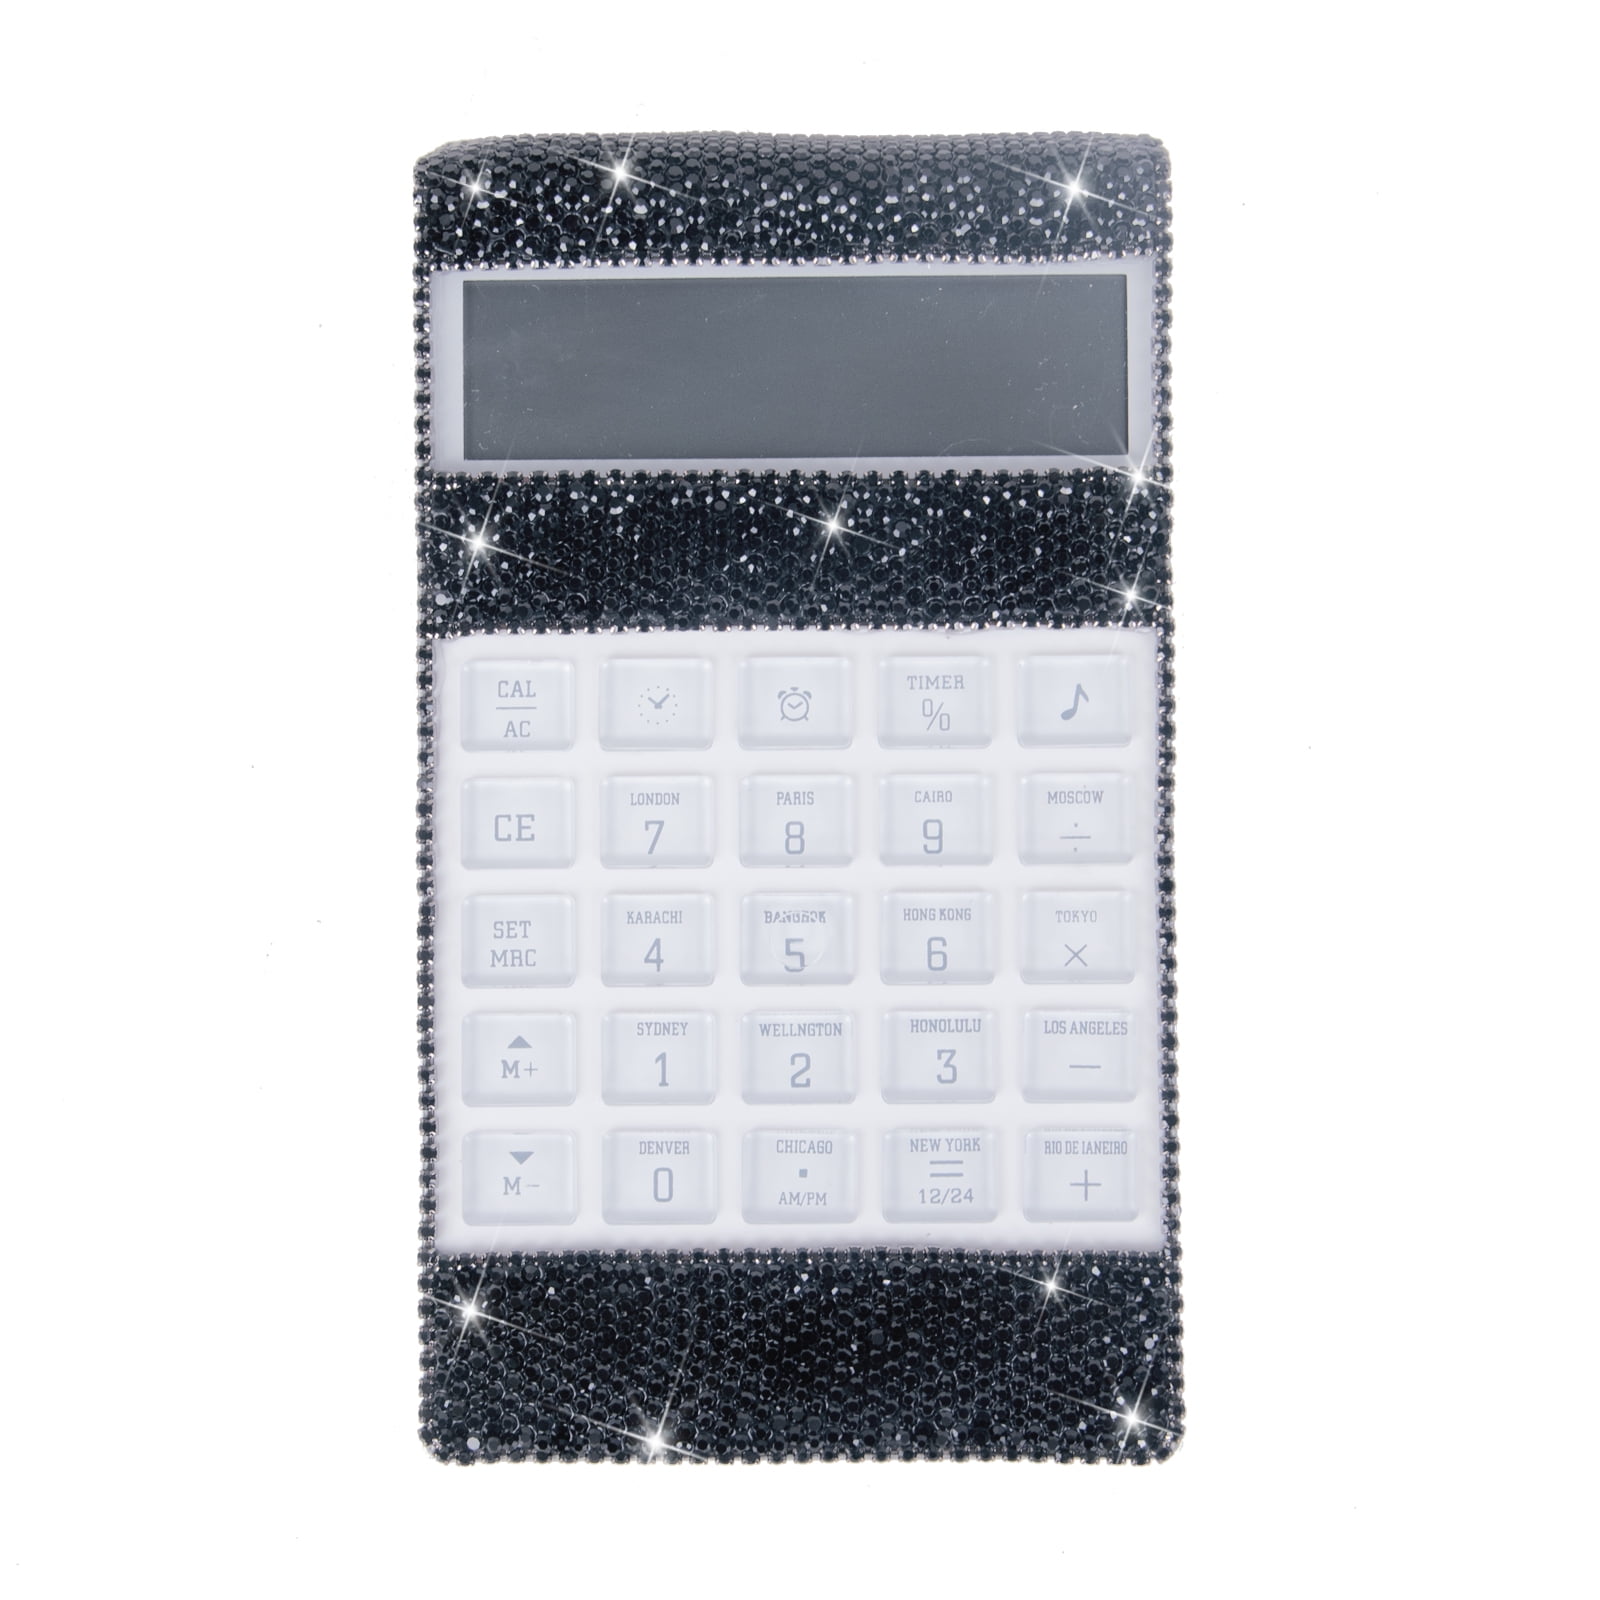 AB Color Office or Home Gift Office Calculator with Bling Bling Crystal Decorative with Calendar Time Alarm Clock for Fashionable Desk Accessory 